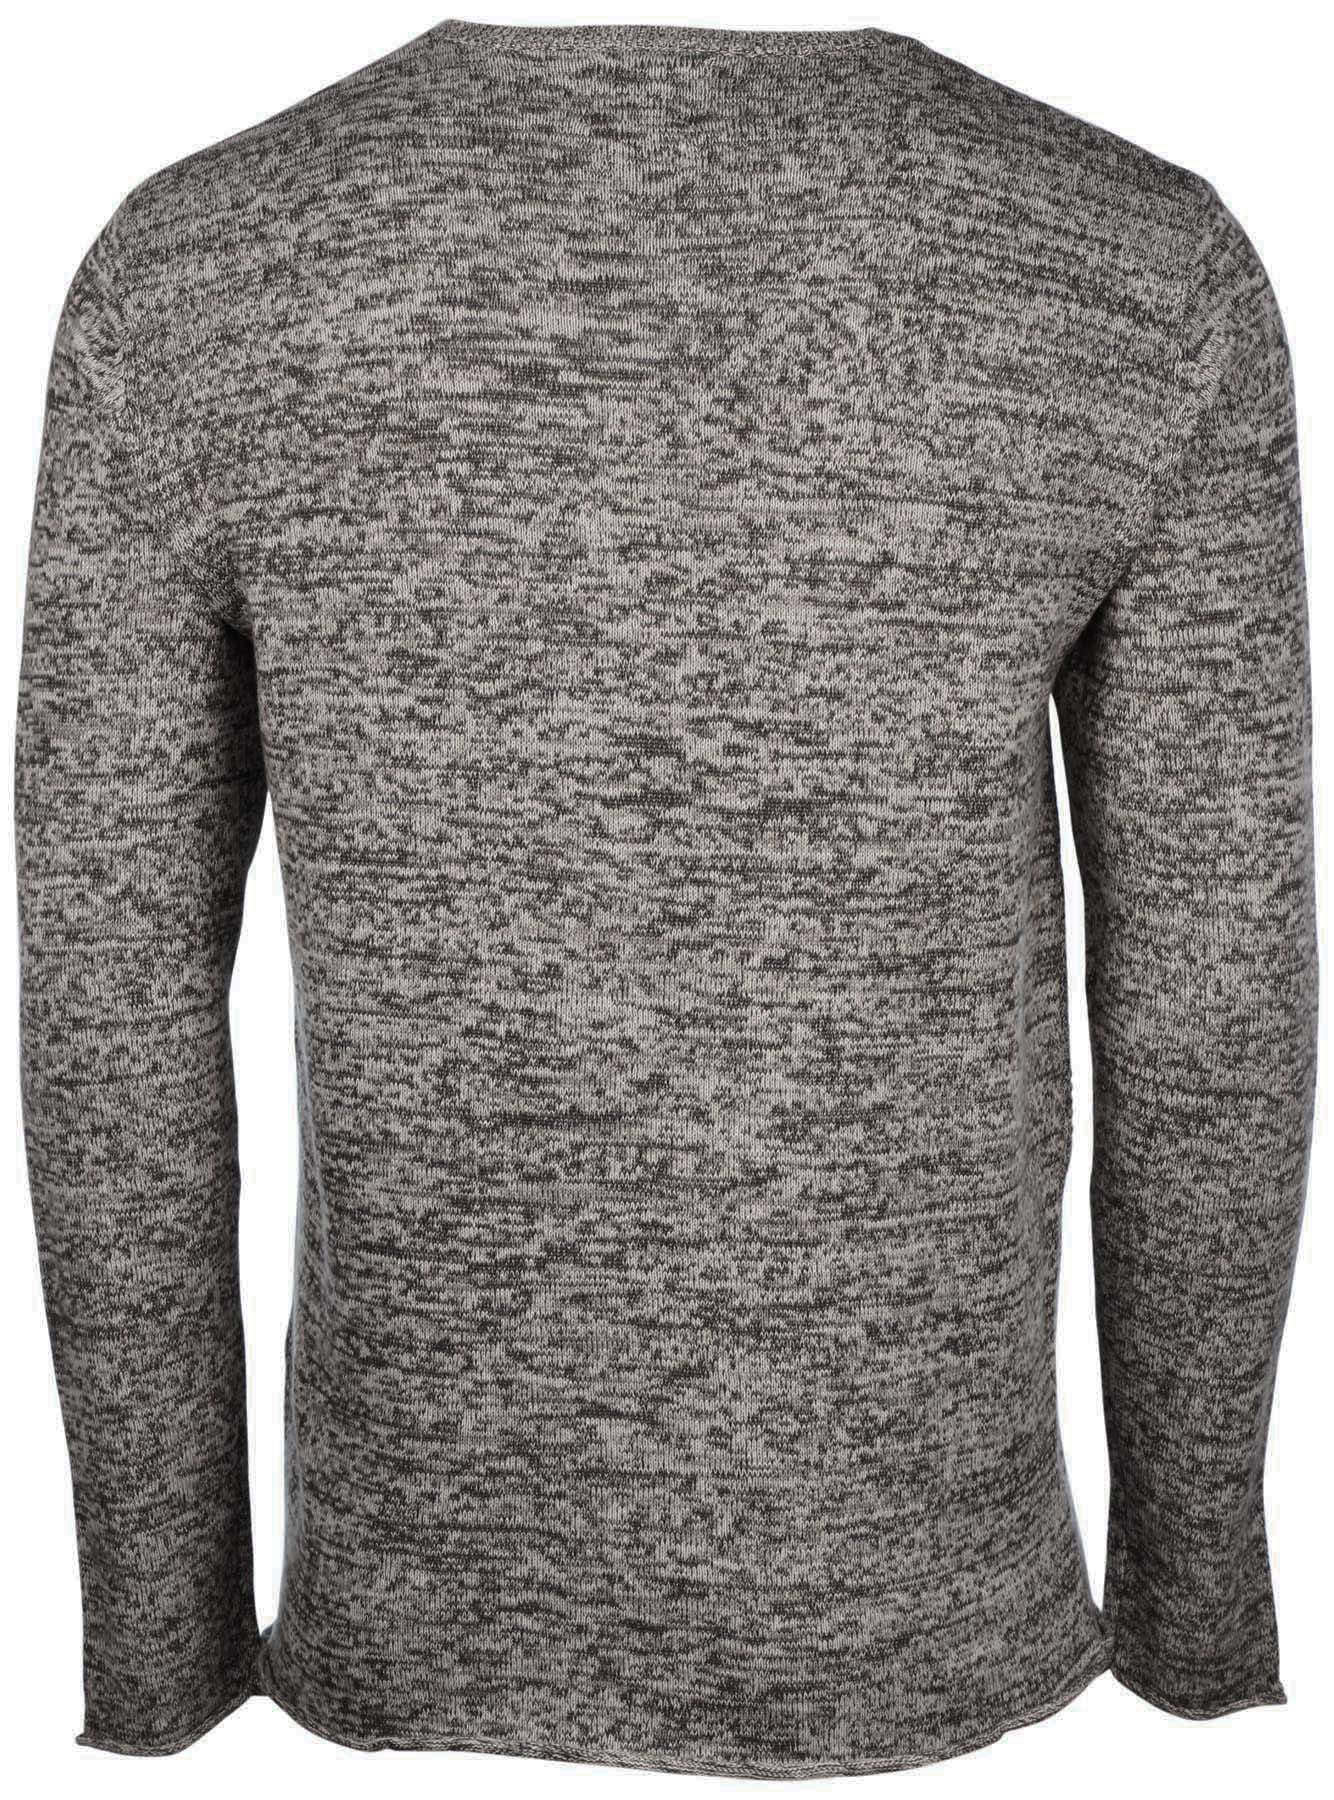 Quiksilver Mens Crooked Sweater 